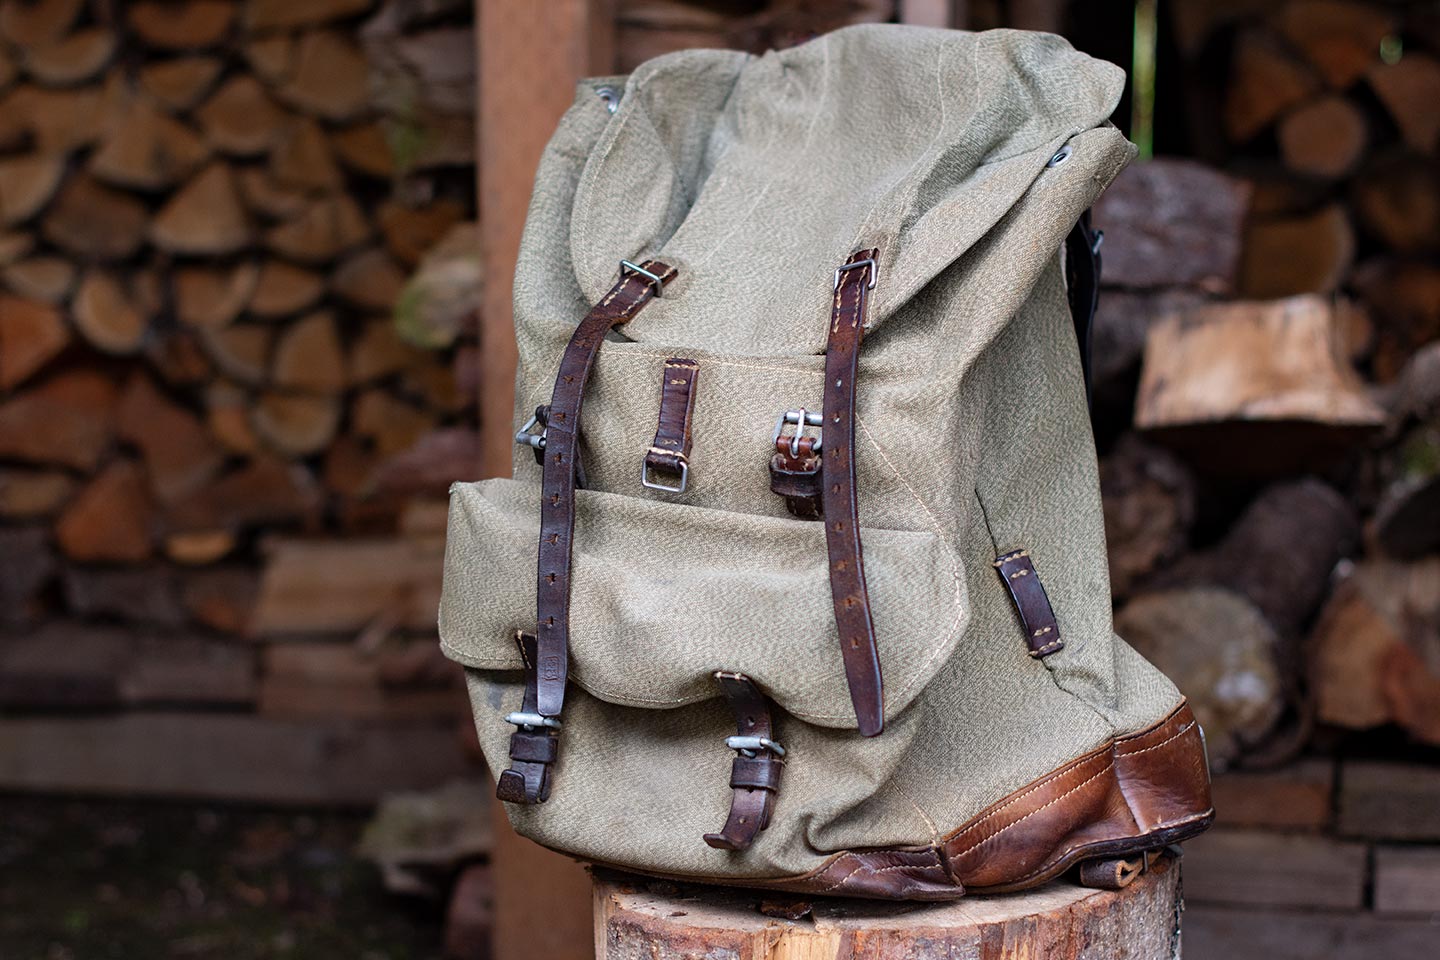 Canvas Swiss Army rucksack with leather fittings sitting on a stump in front of stacked wood